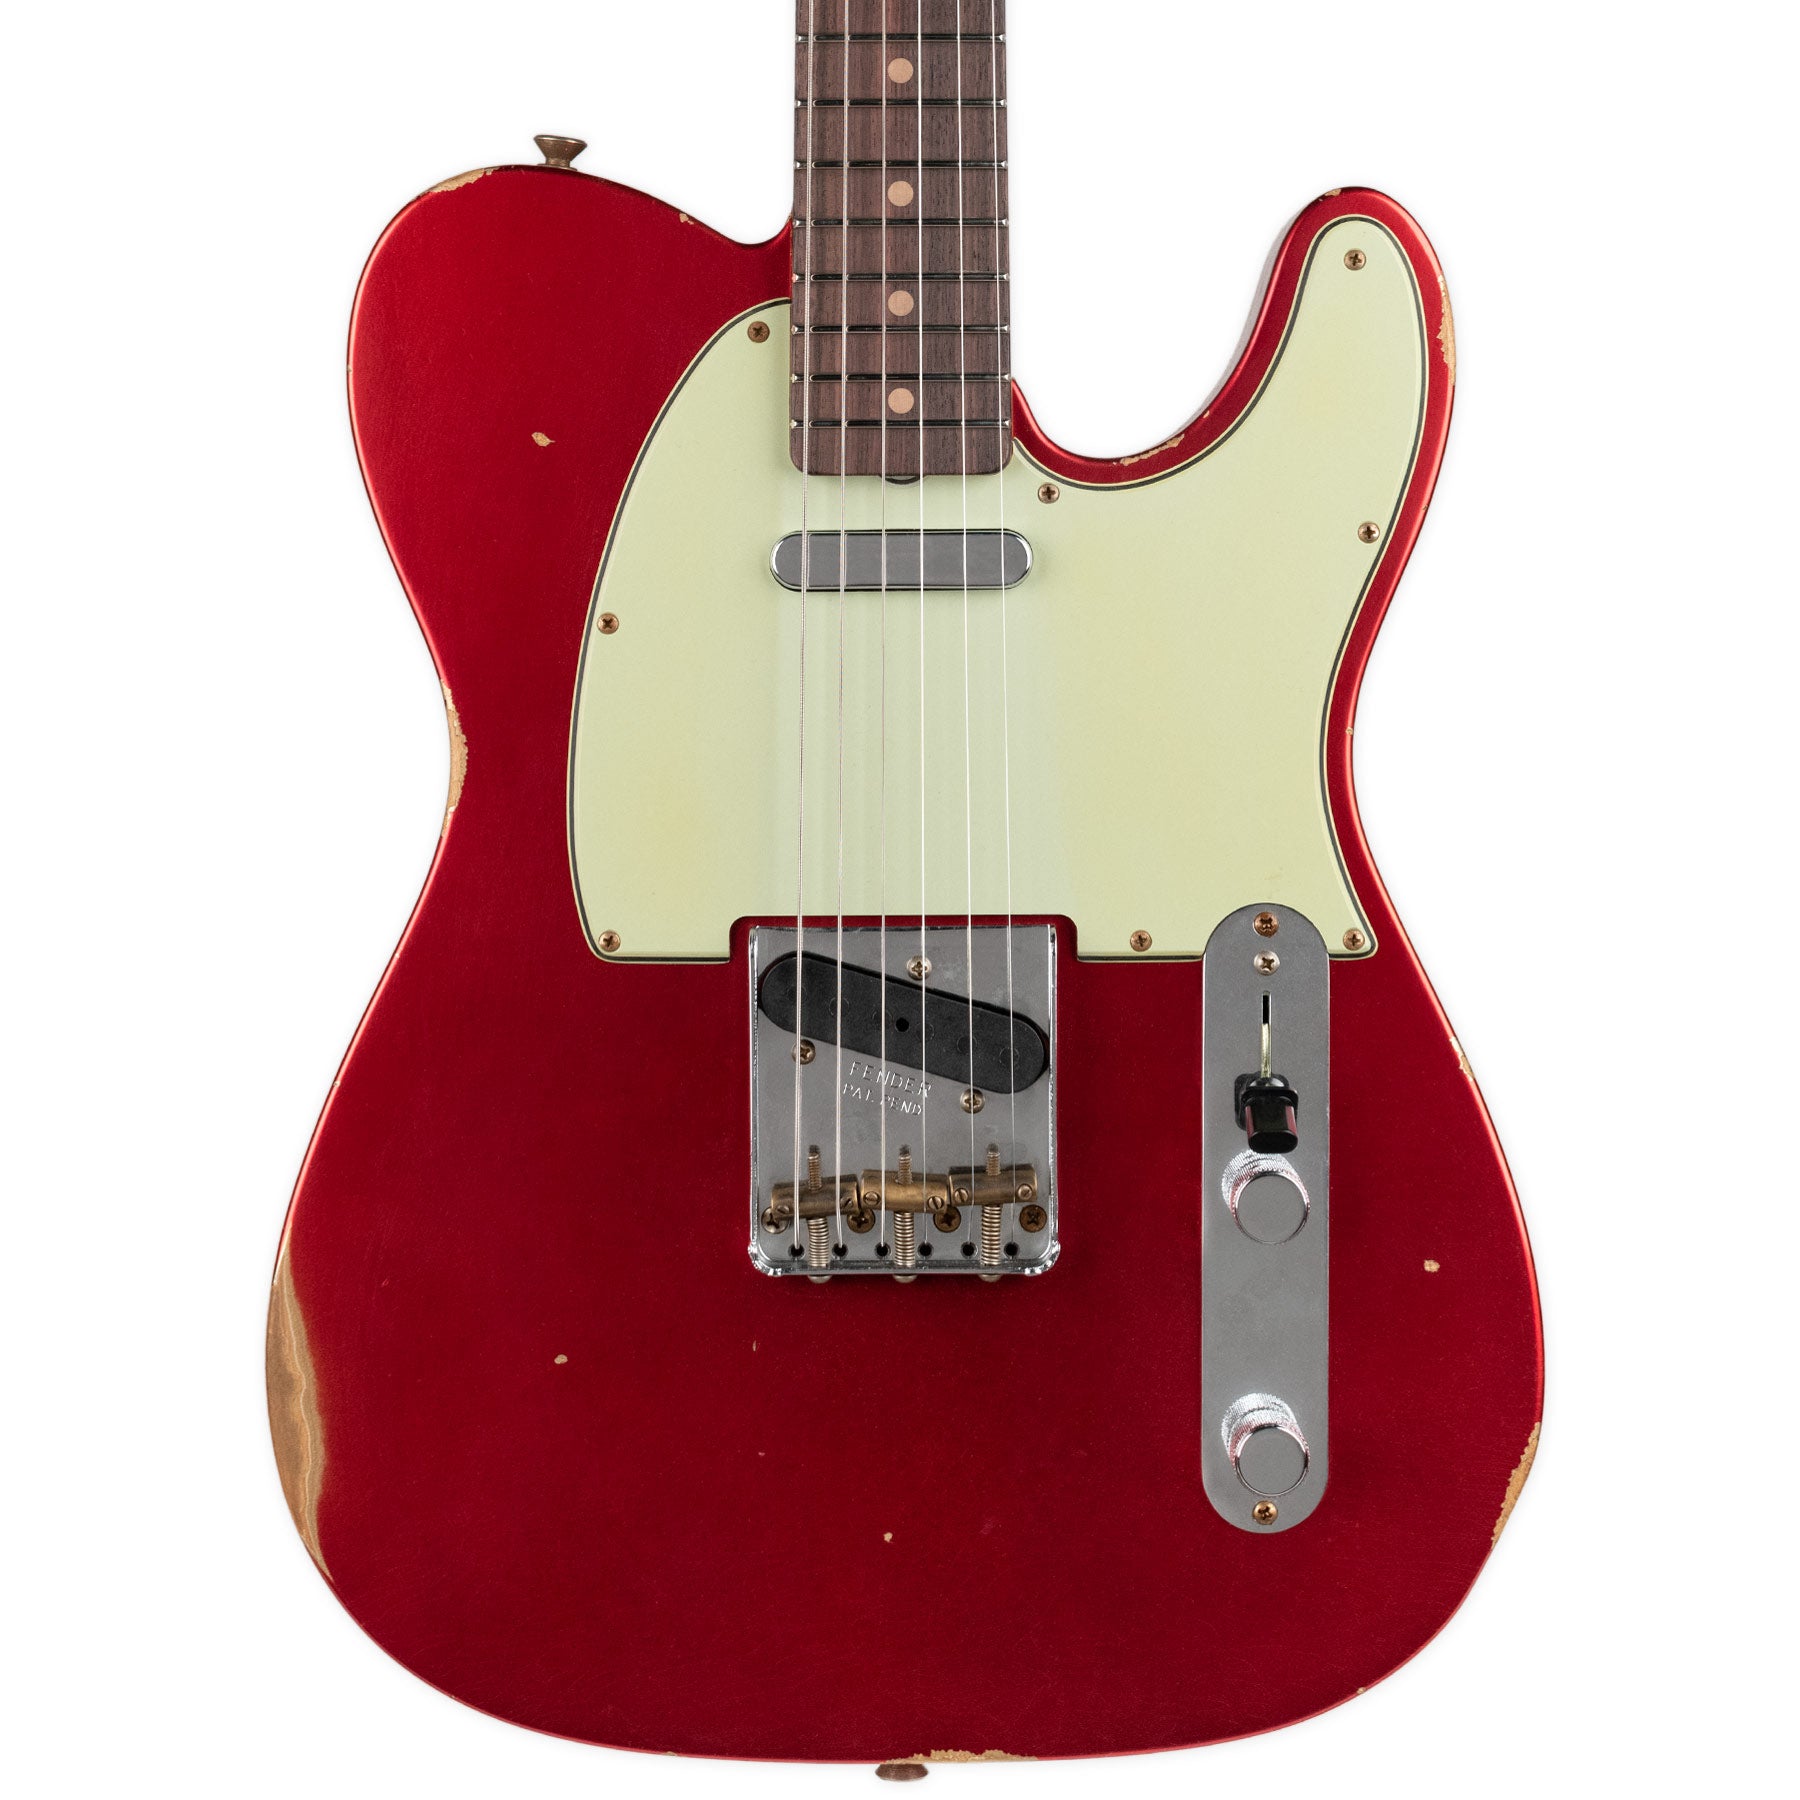 FENDER CUSTOM SHOP LIMITED EDITION '61 TELECASTER RELIC - AGED CANDY APPLE RED